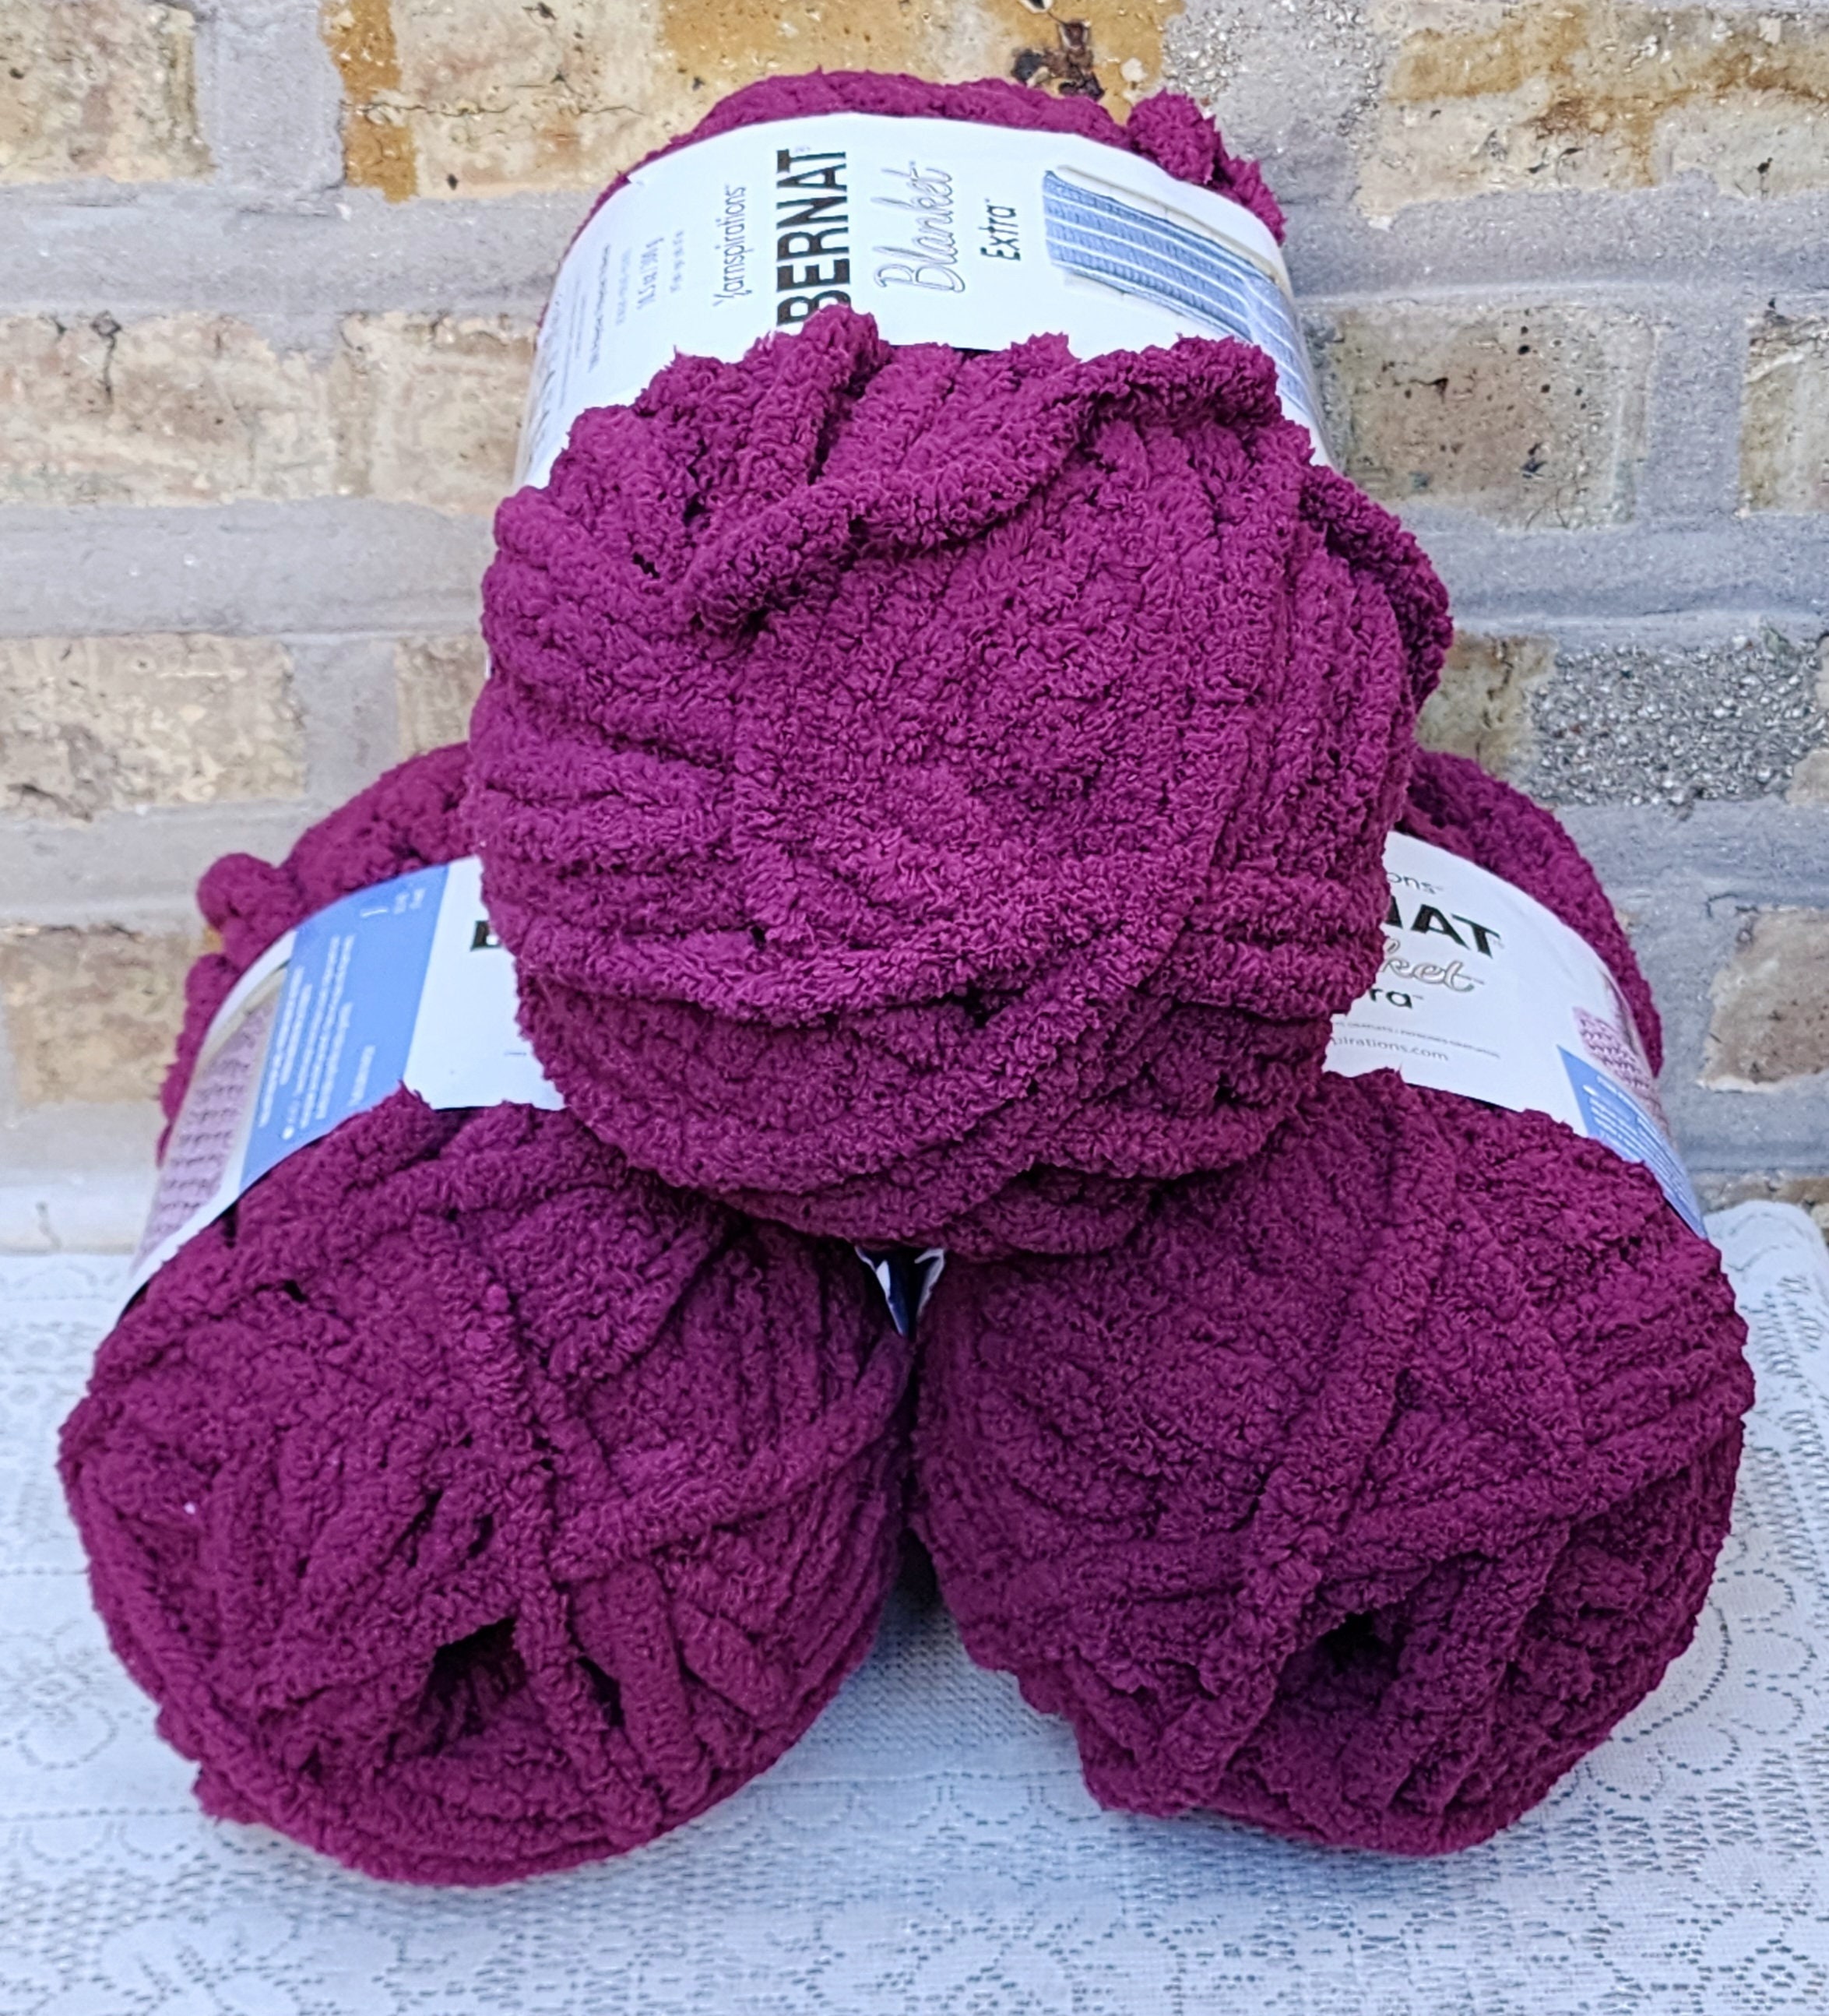 Mainstays 4 pack Chenille Chunky Yarn Heritage Russet Burgundy - New